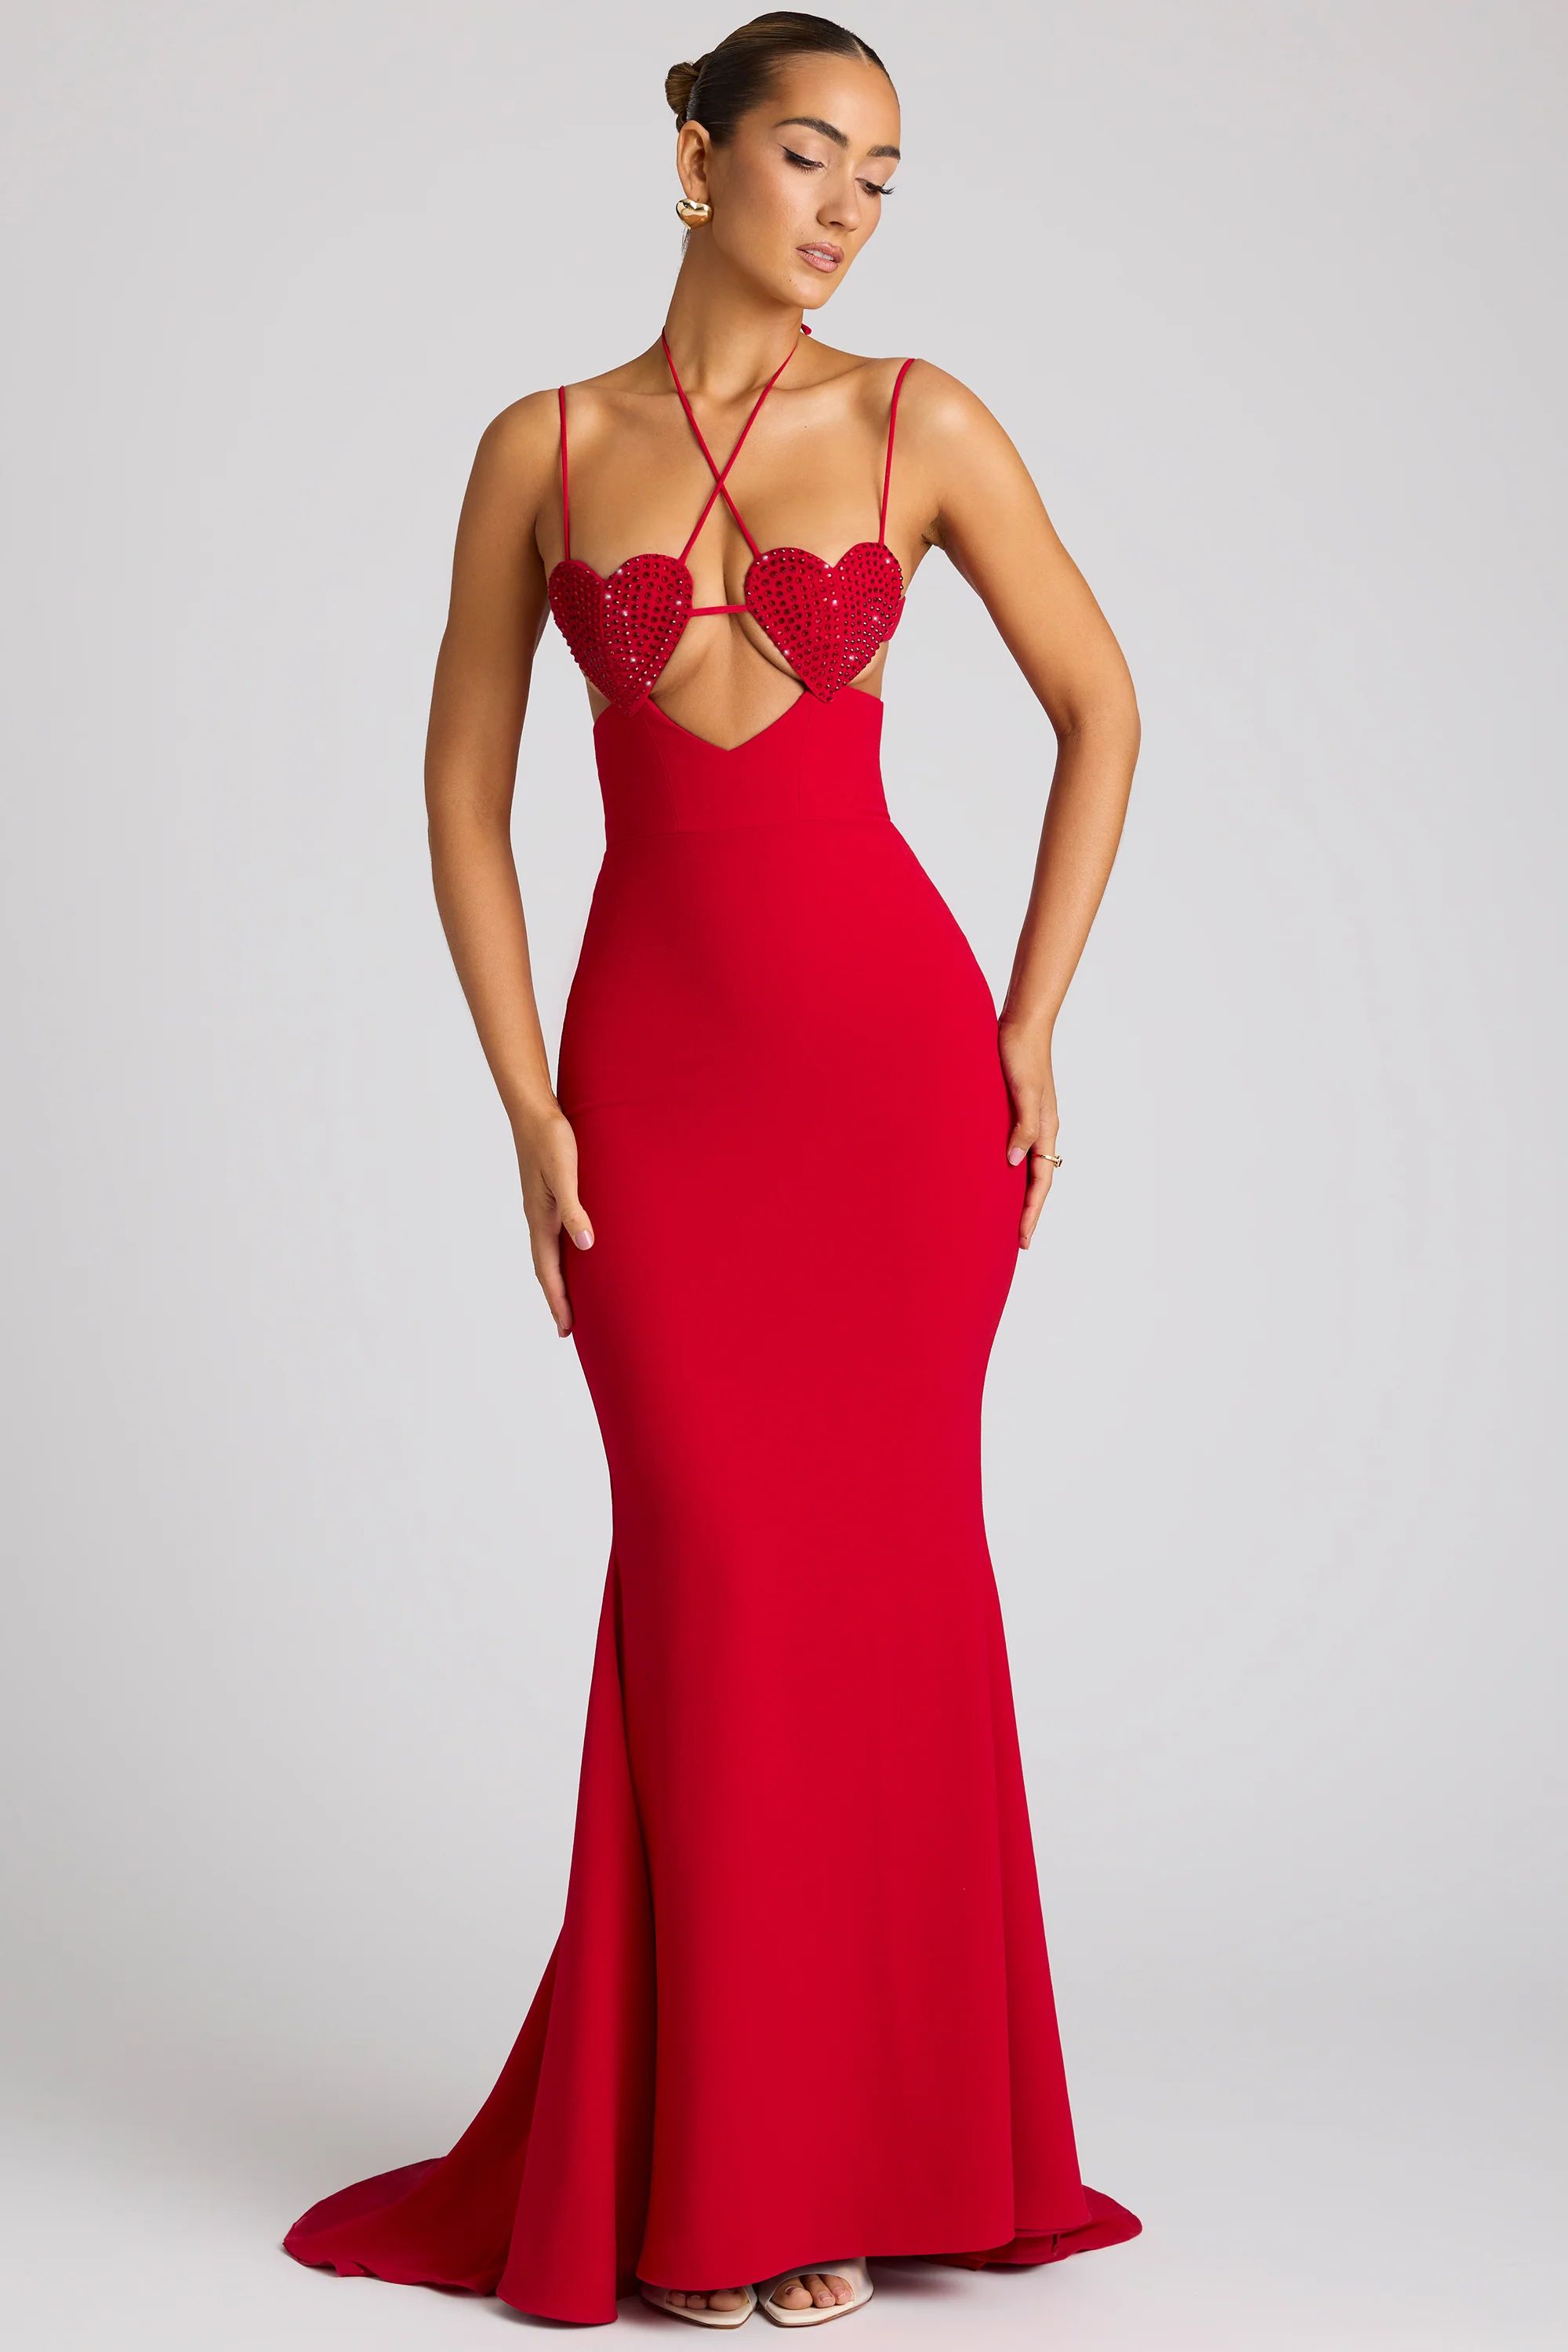 Embellished Heart Cup Detail Evening Gown in Fire Red | Oh Polly